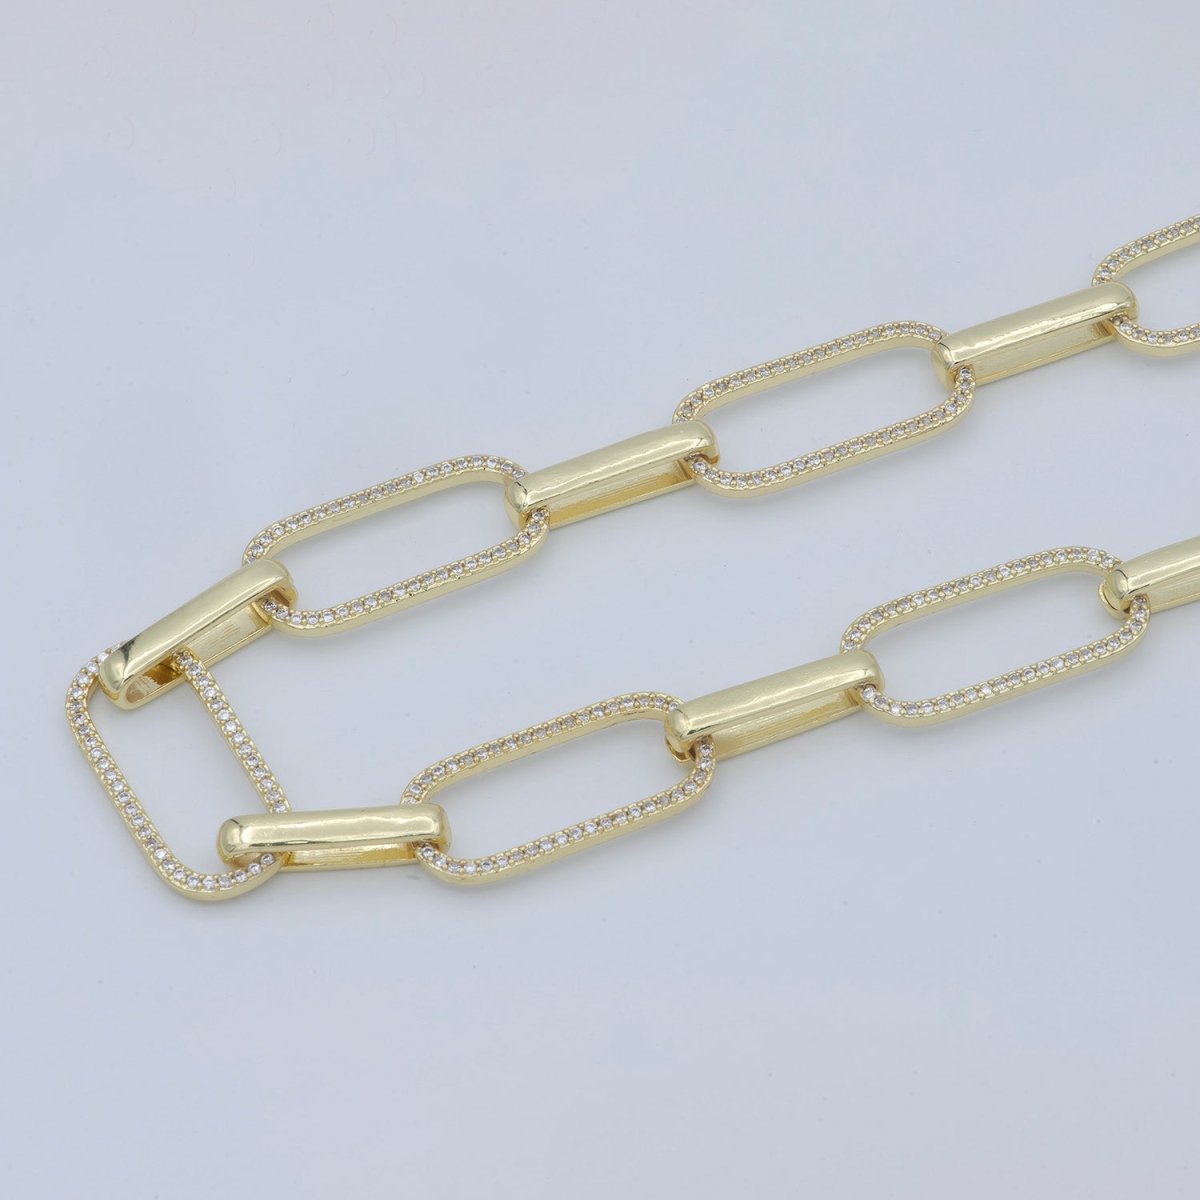 Bold Gold Micro Pave Paperclip Chain by Meter, CZ Specialty Link Chain Necklace by Meter, For Fashion Jewelry Making, 24K Gold Filled UNIQUE PAPER CLIP For Necklace Bracelet Anklet Supply Component | ROLL-489(O-077) Clearance Pricing - DLUXCA